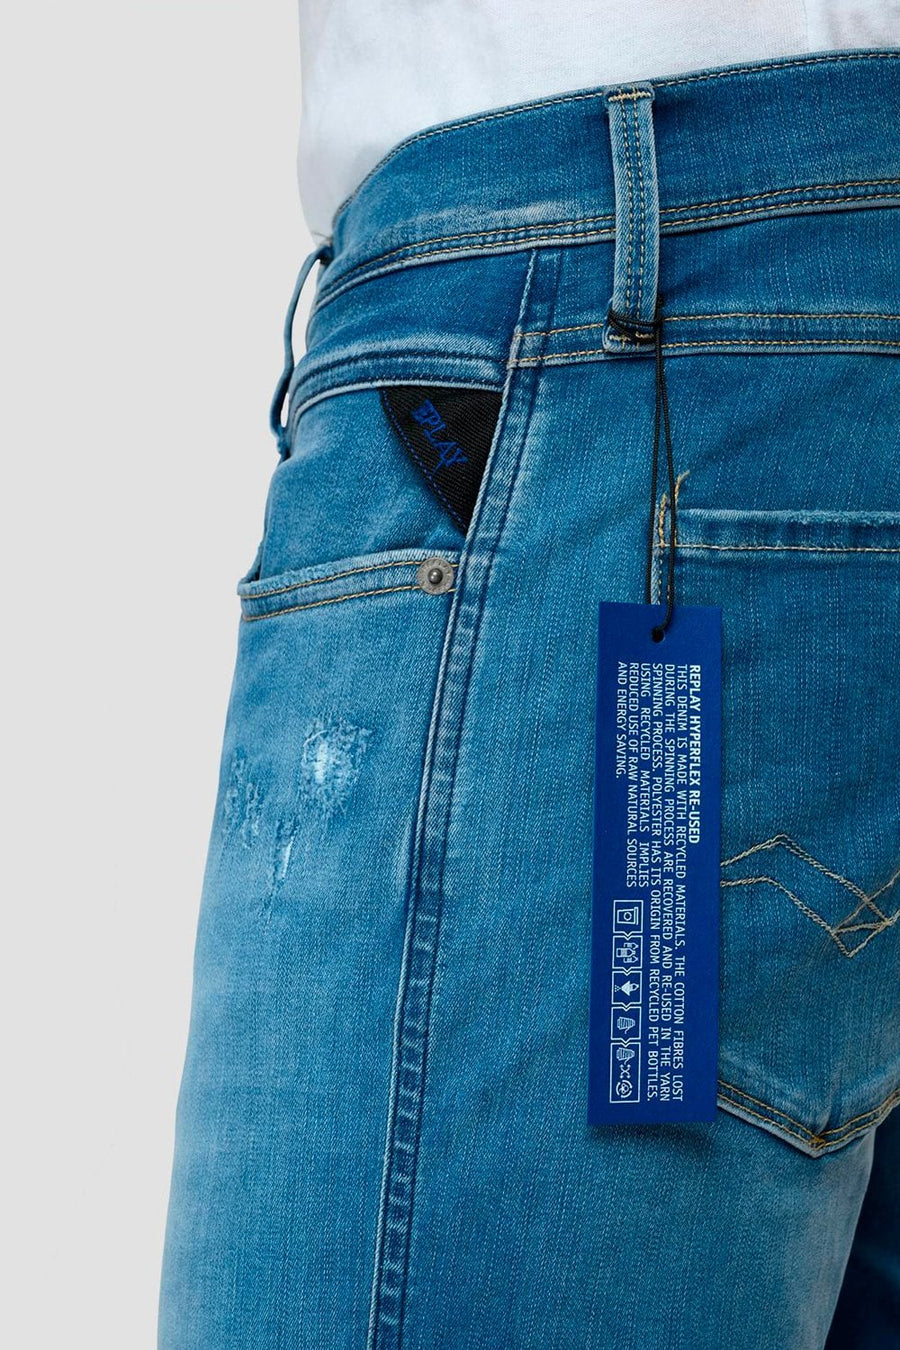 Buy the Replay Hyperflex Bronny Rip+Repair Jeans in Blue at Intro. Spend £50 for free UK delivery. Official stockists. We ship worldwide.